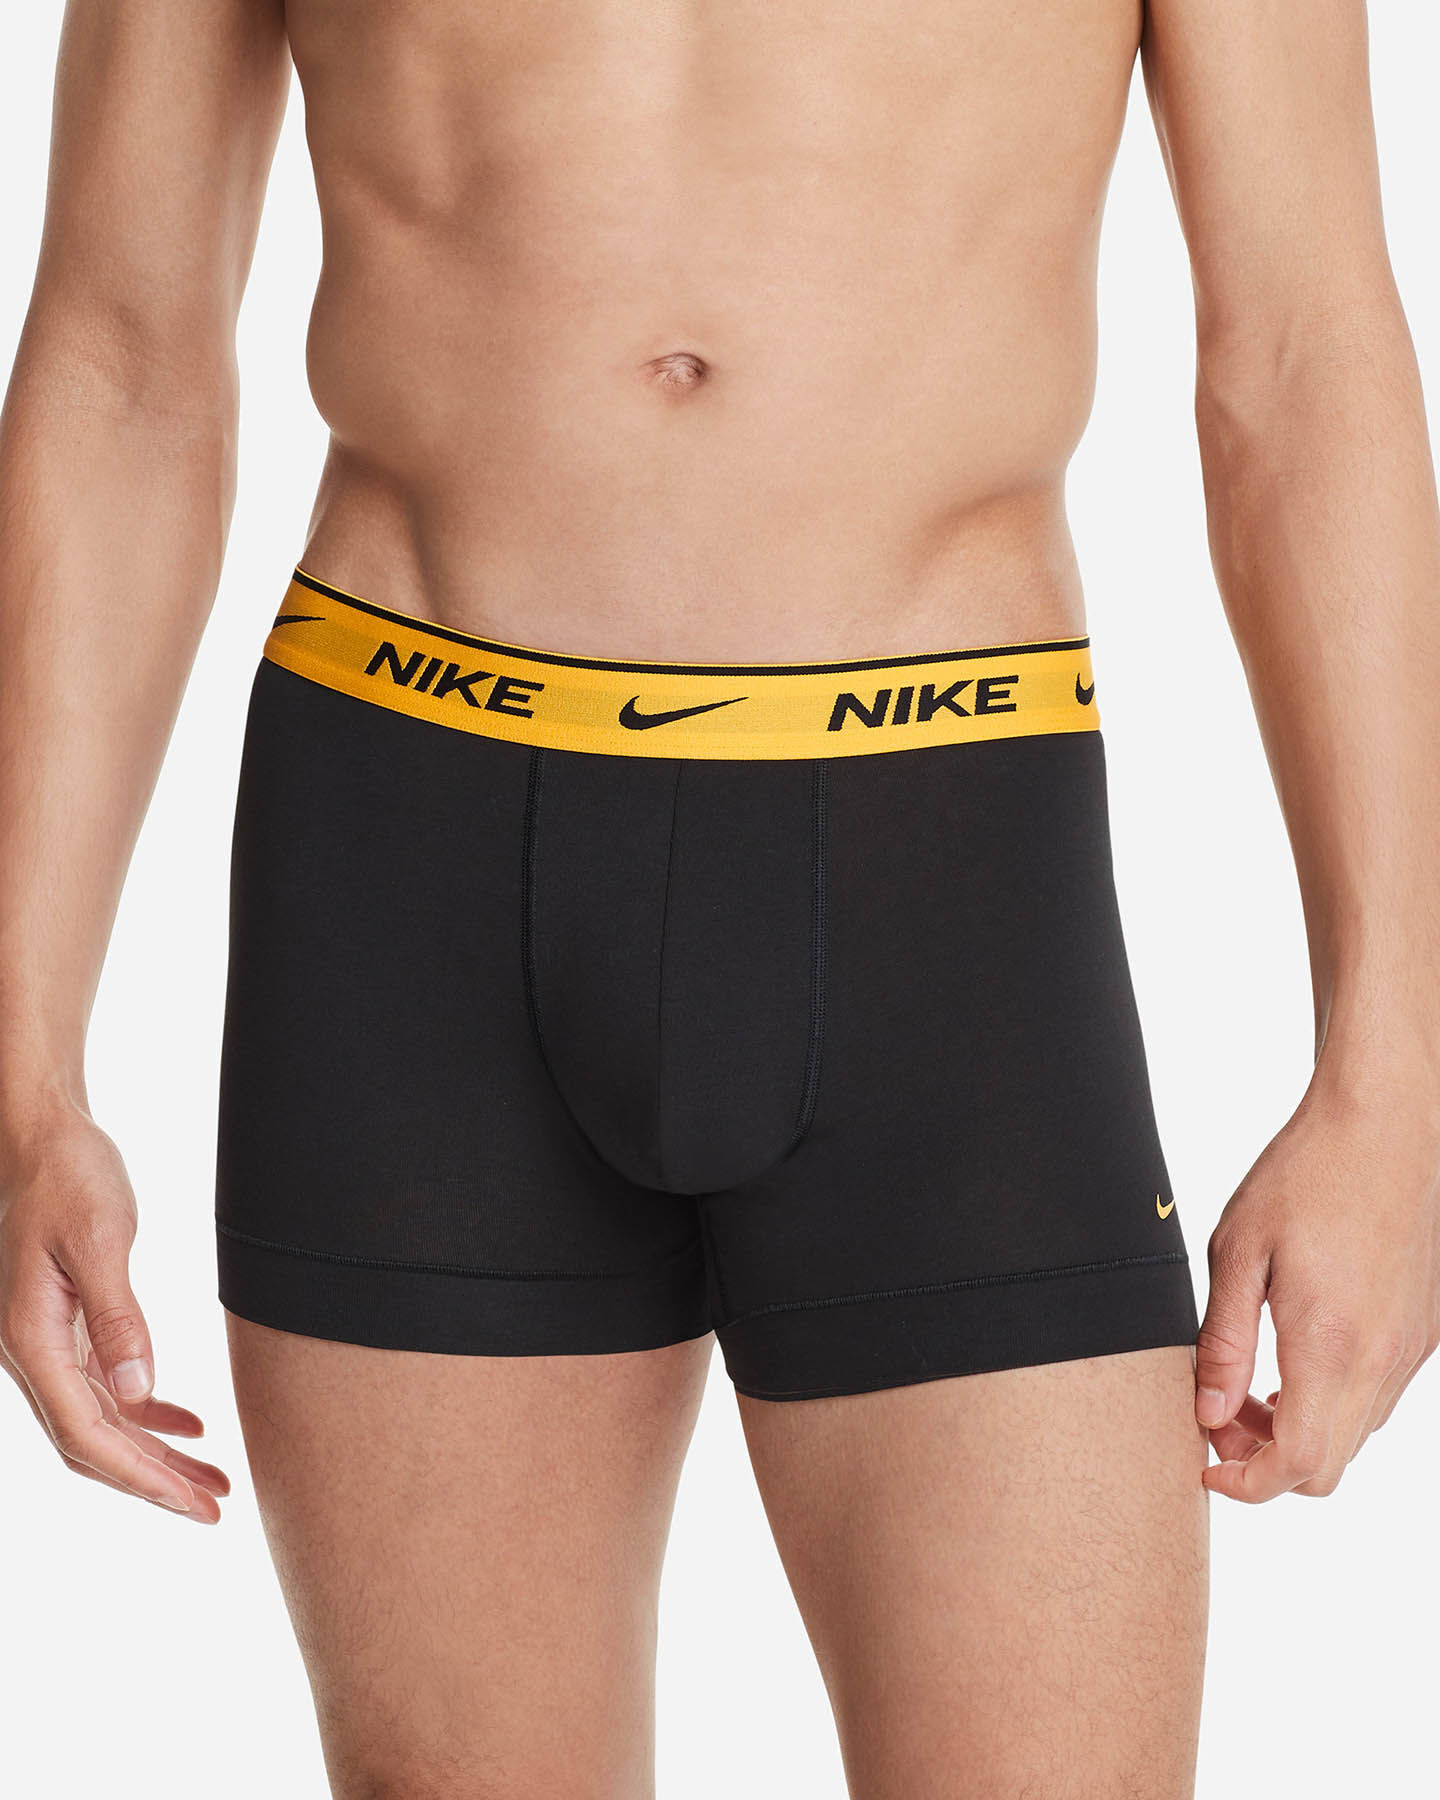  Intimo NIKE 3PACK BOXER EVERYDAY M S4099884|M1R|M scatto 1